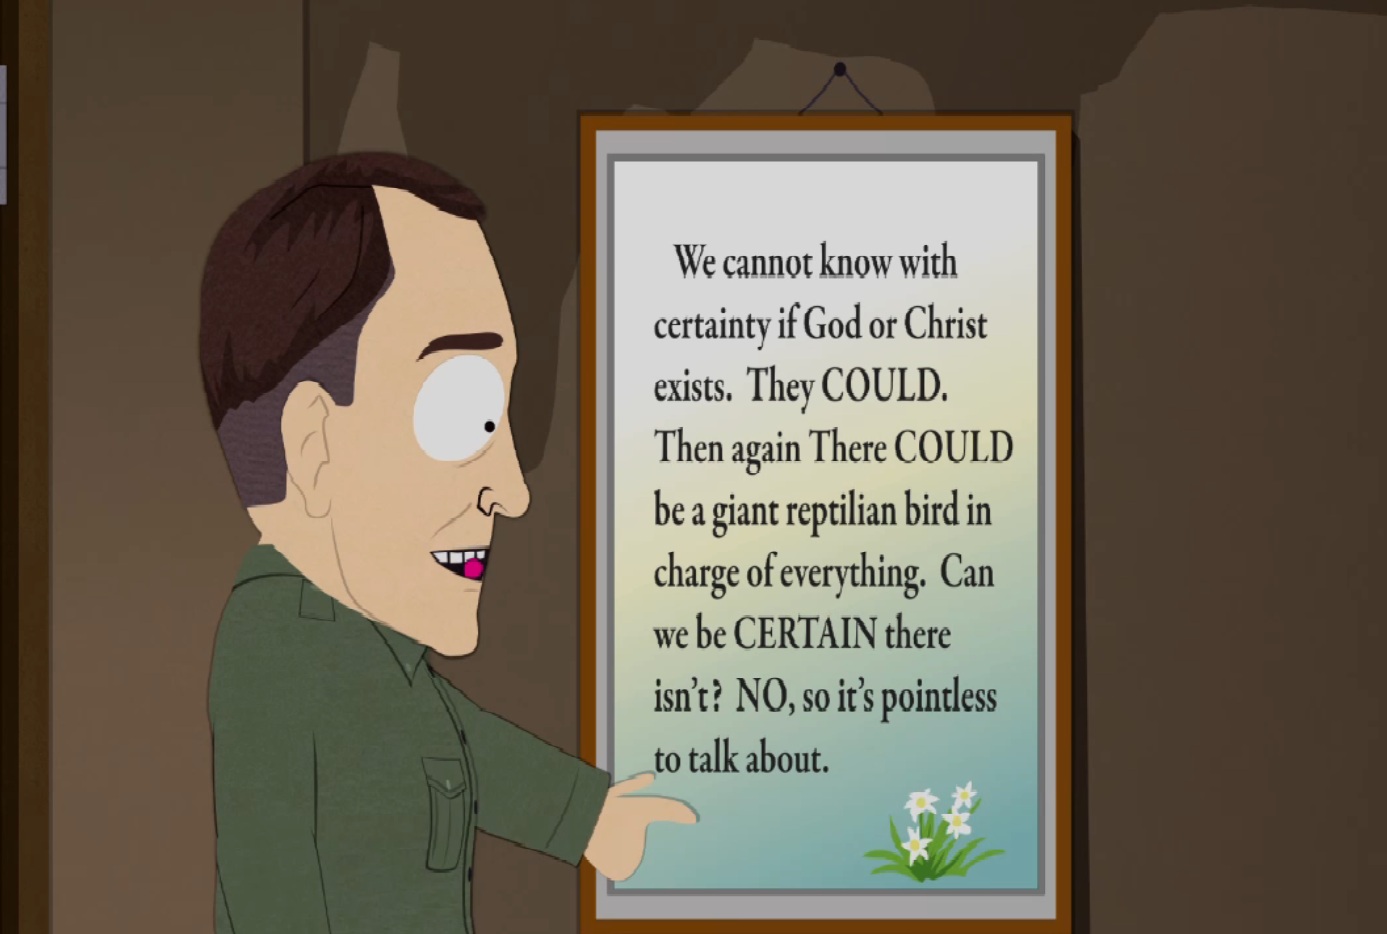 Use them again. Южный парк агностики. If God exists Rick its. It's pointless to be.